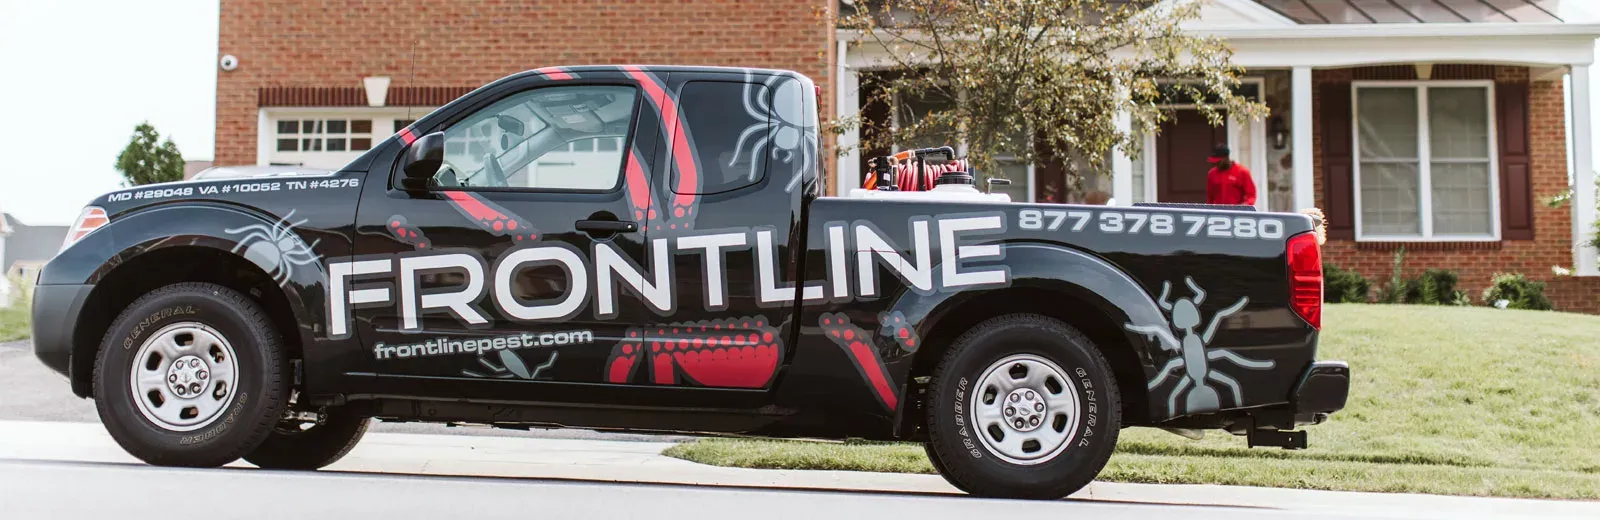 Frontline Pest truck in front of home